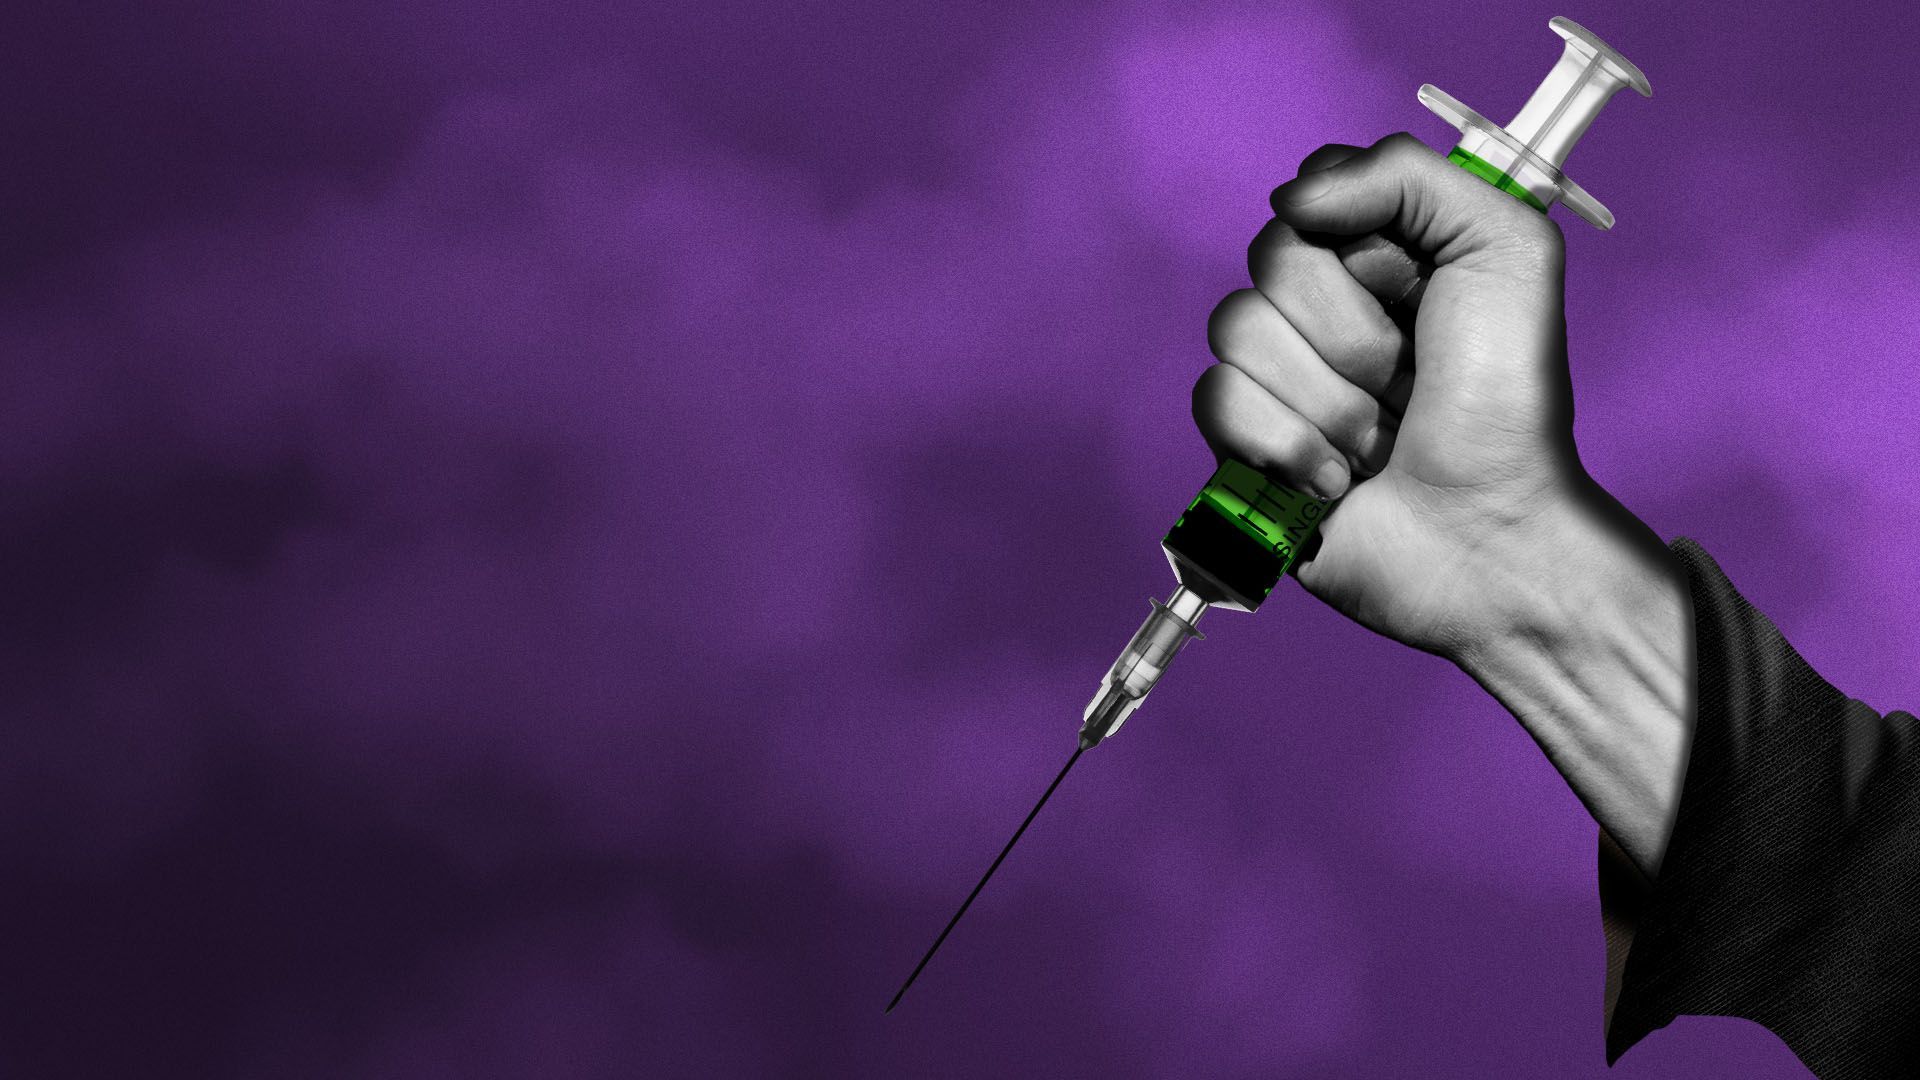 Illustration of a hand wielding a syringe like a knife